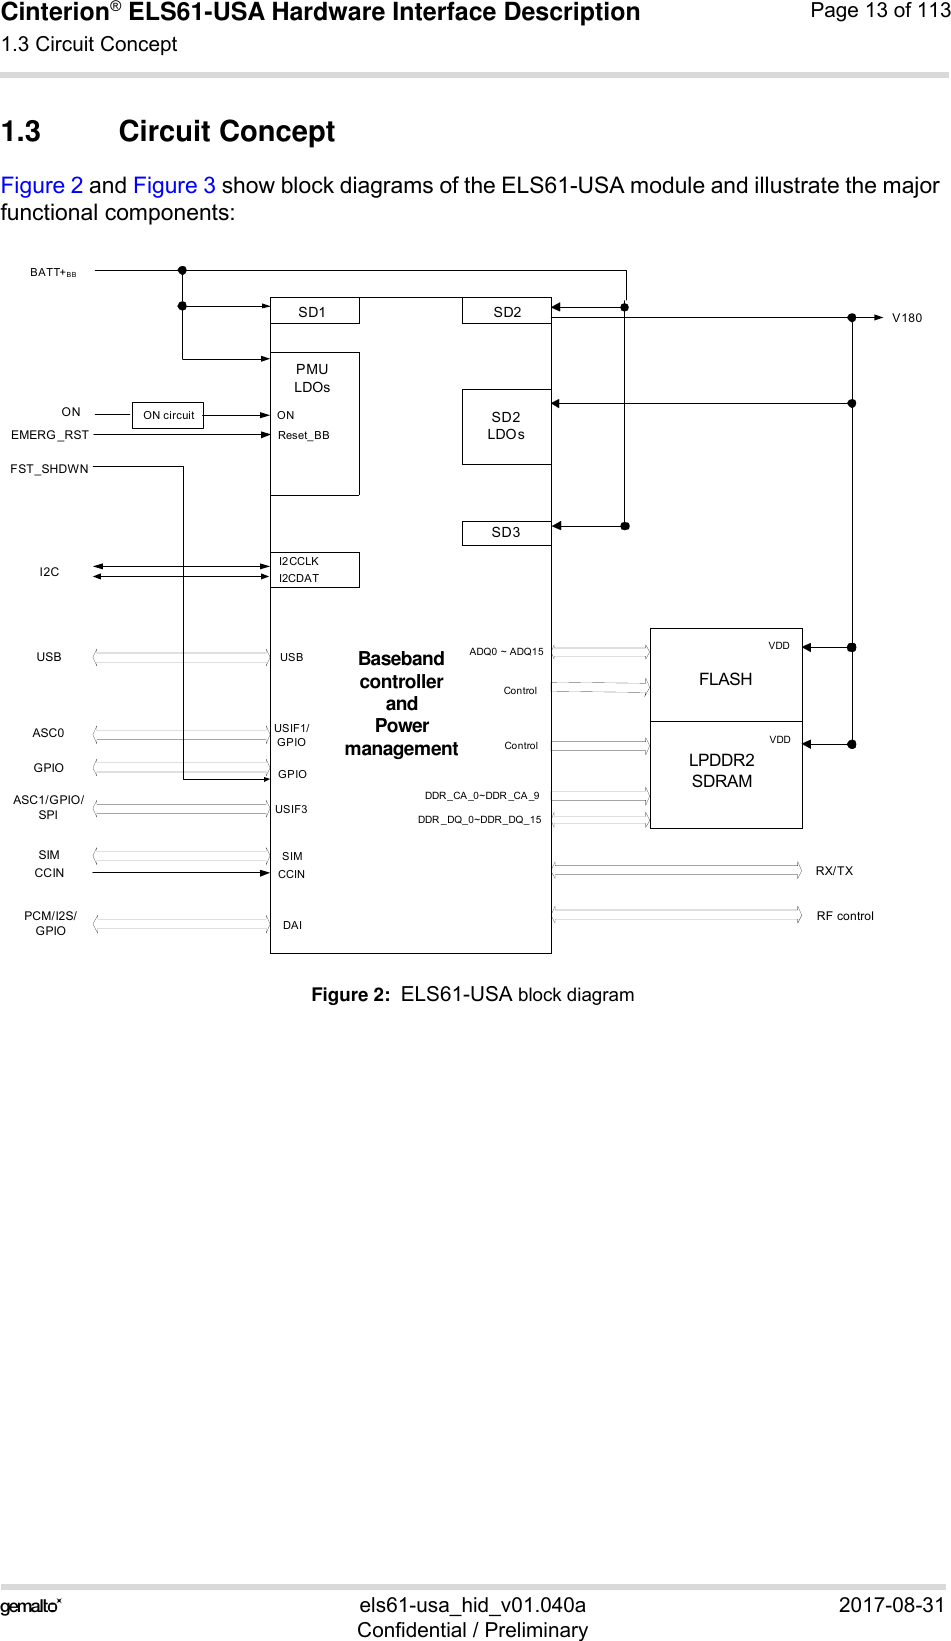 Cinterion® ELS61-USA Hardware Interface Description1.3 Circuit Concept14els61-usa_hid_v01.040a 2017-08-31Confidential / PreliminaryPage 13 of 1131.3 Circuit ConceptFigure 2 and Figure 3 show block diagrams of the ELS61-USA module and illustrate the major functional components:Figure 2:  ELS61-USA block diagramSD1 SD2SD2 LDOsPMULDOsONReset_BBSD3I2CDATI2CCLKUSBGPIOSIMCCINLPDDR2SDRAMFLASHVDDVDDADQ0 ~ ADQ15DDR_CA _0~DDR _CA _9DDR _DQ_0~DDR_DQ_15ControlControlCCINSIMGPIOASC0USBI2CON circuitONEMERG _RSTBATT+BBRX/TXRF controlV180Baseband controller and Power managementDAIPCM/I2S/GPIOUSIF1/GPIOFST_SHDWNASC1/GPIO/SPI USIF3